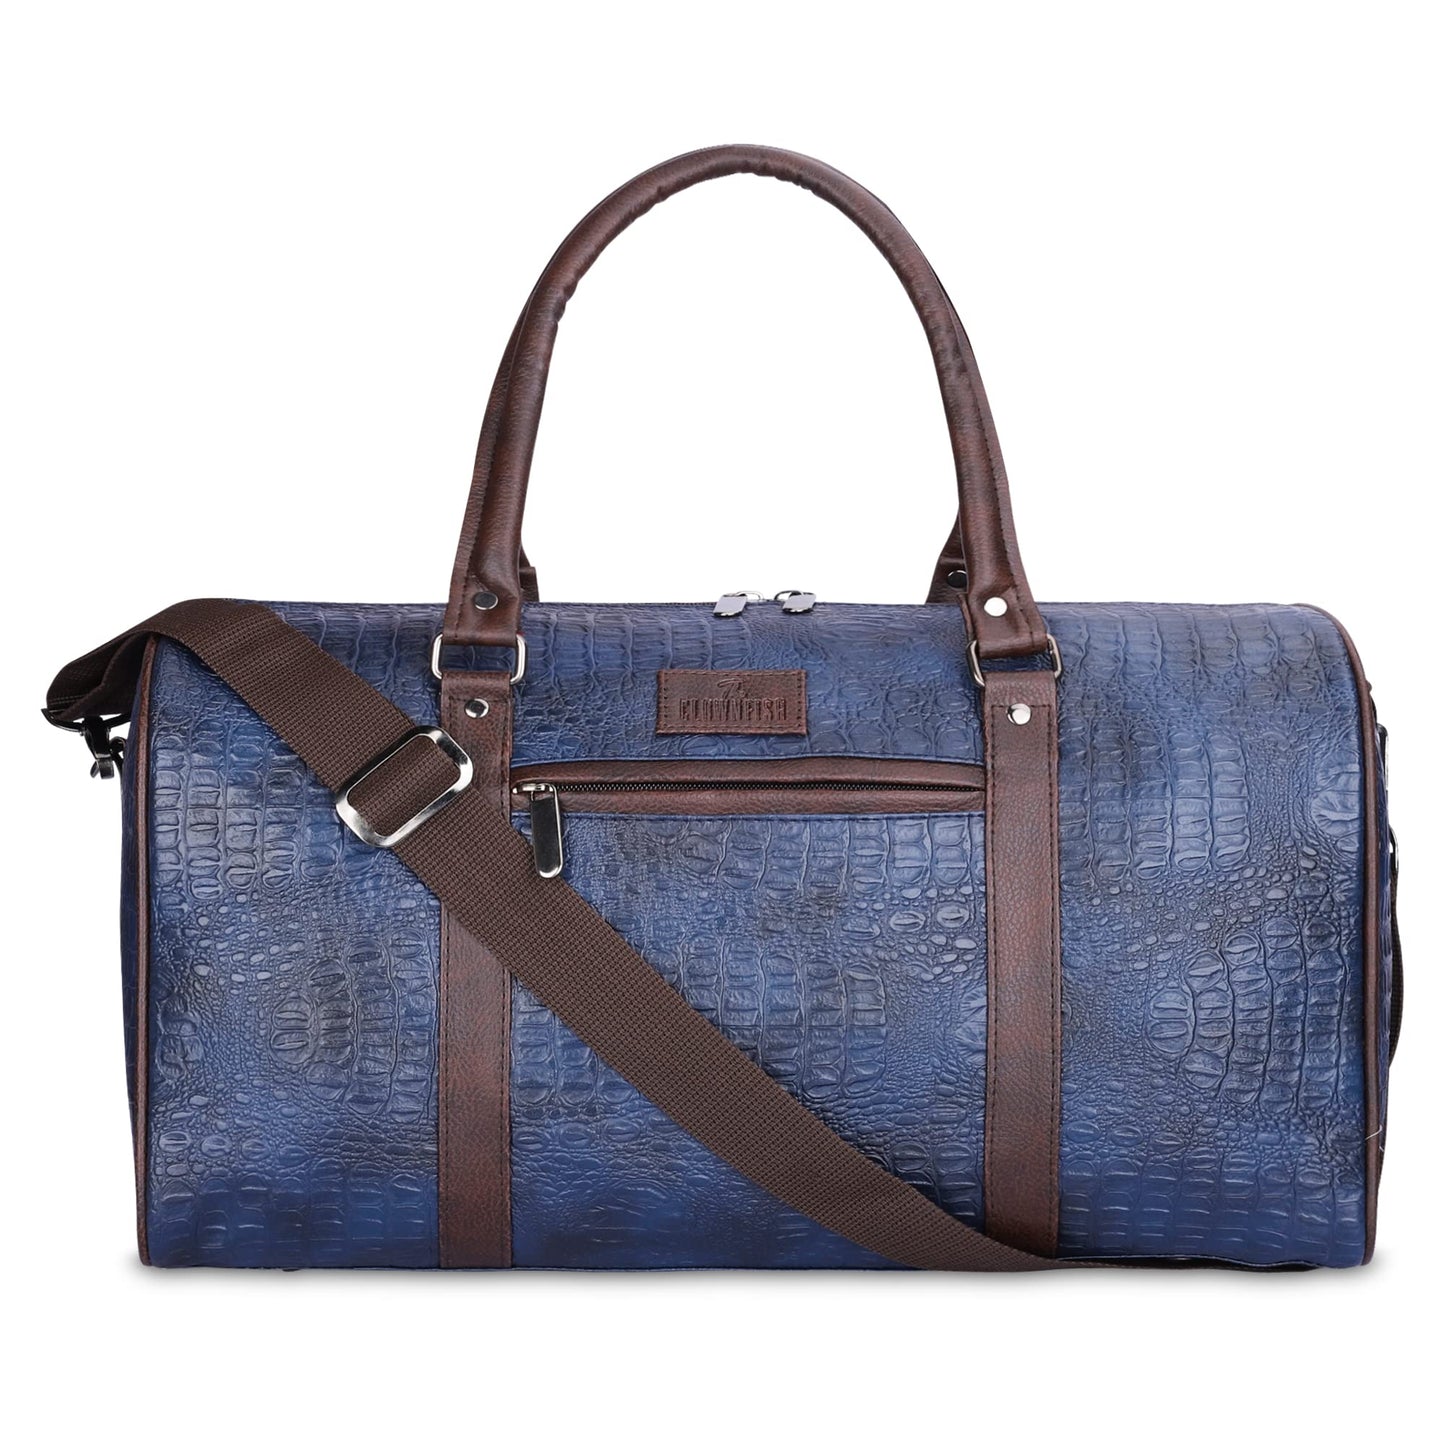 The Clownfish Expedition Series 29 litres Faux Leather Crocodile Finish Unisex Travel Duffle Bag Weekender Bag (Blue)